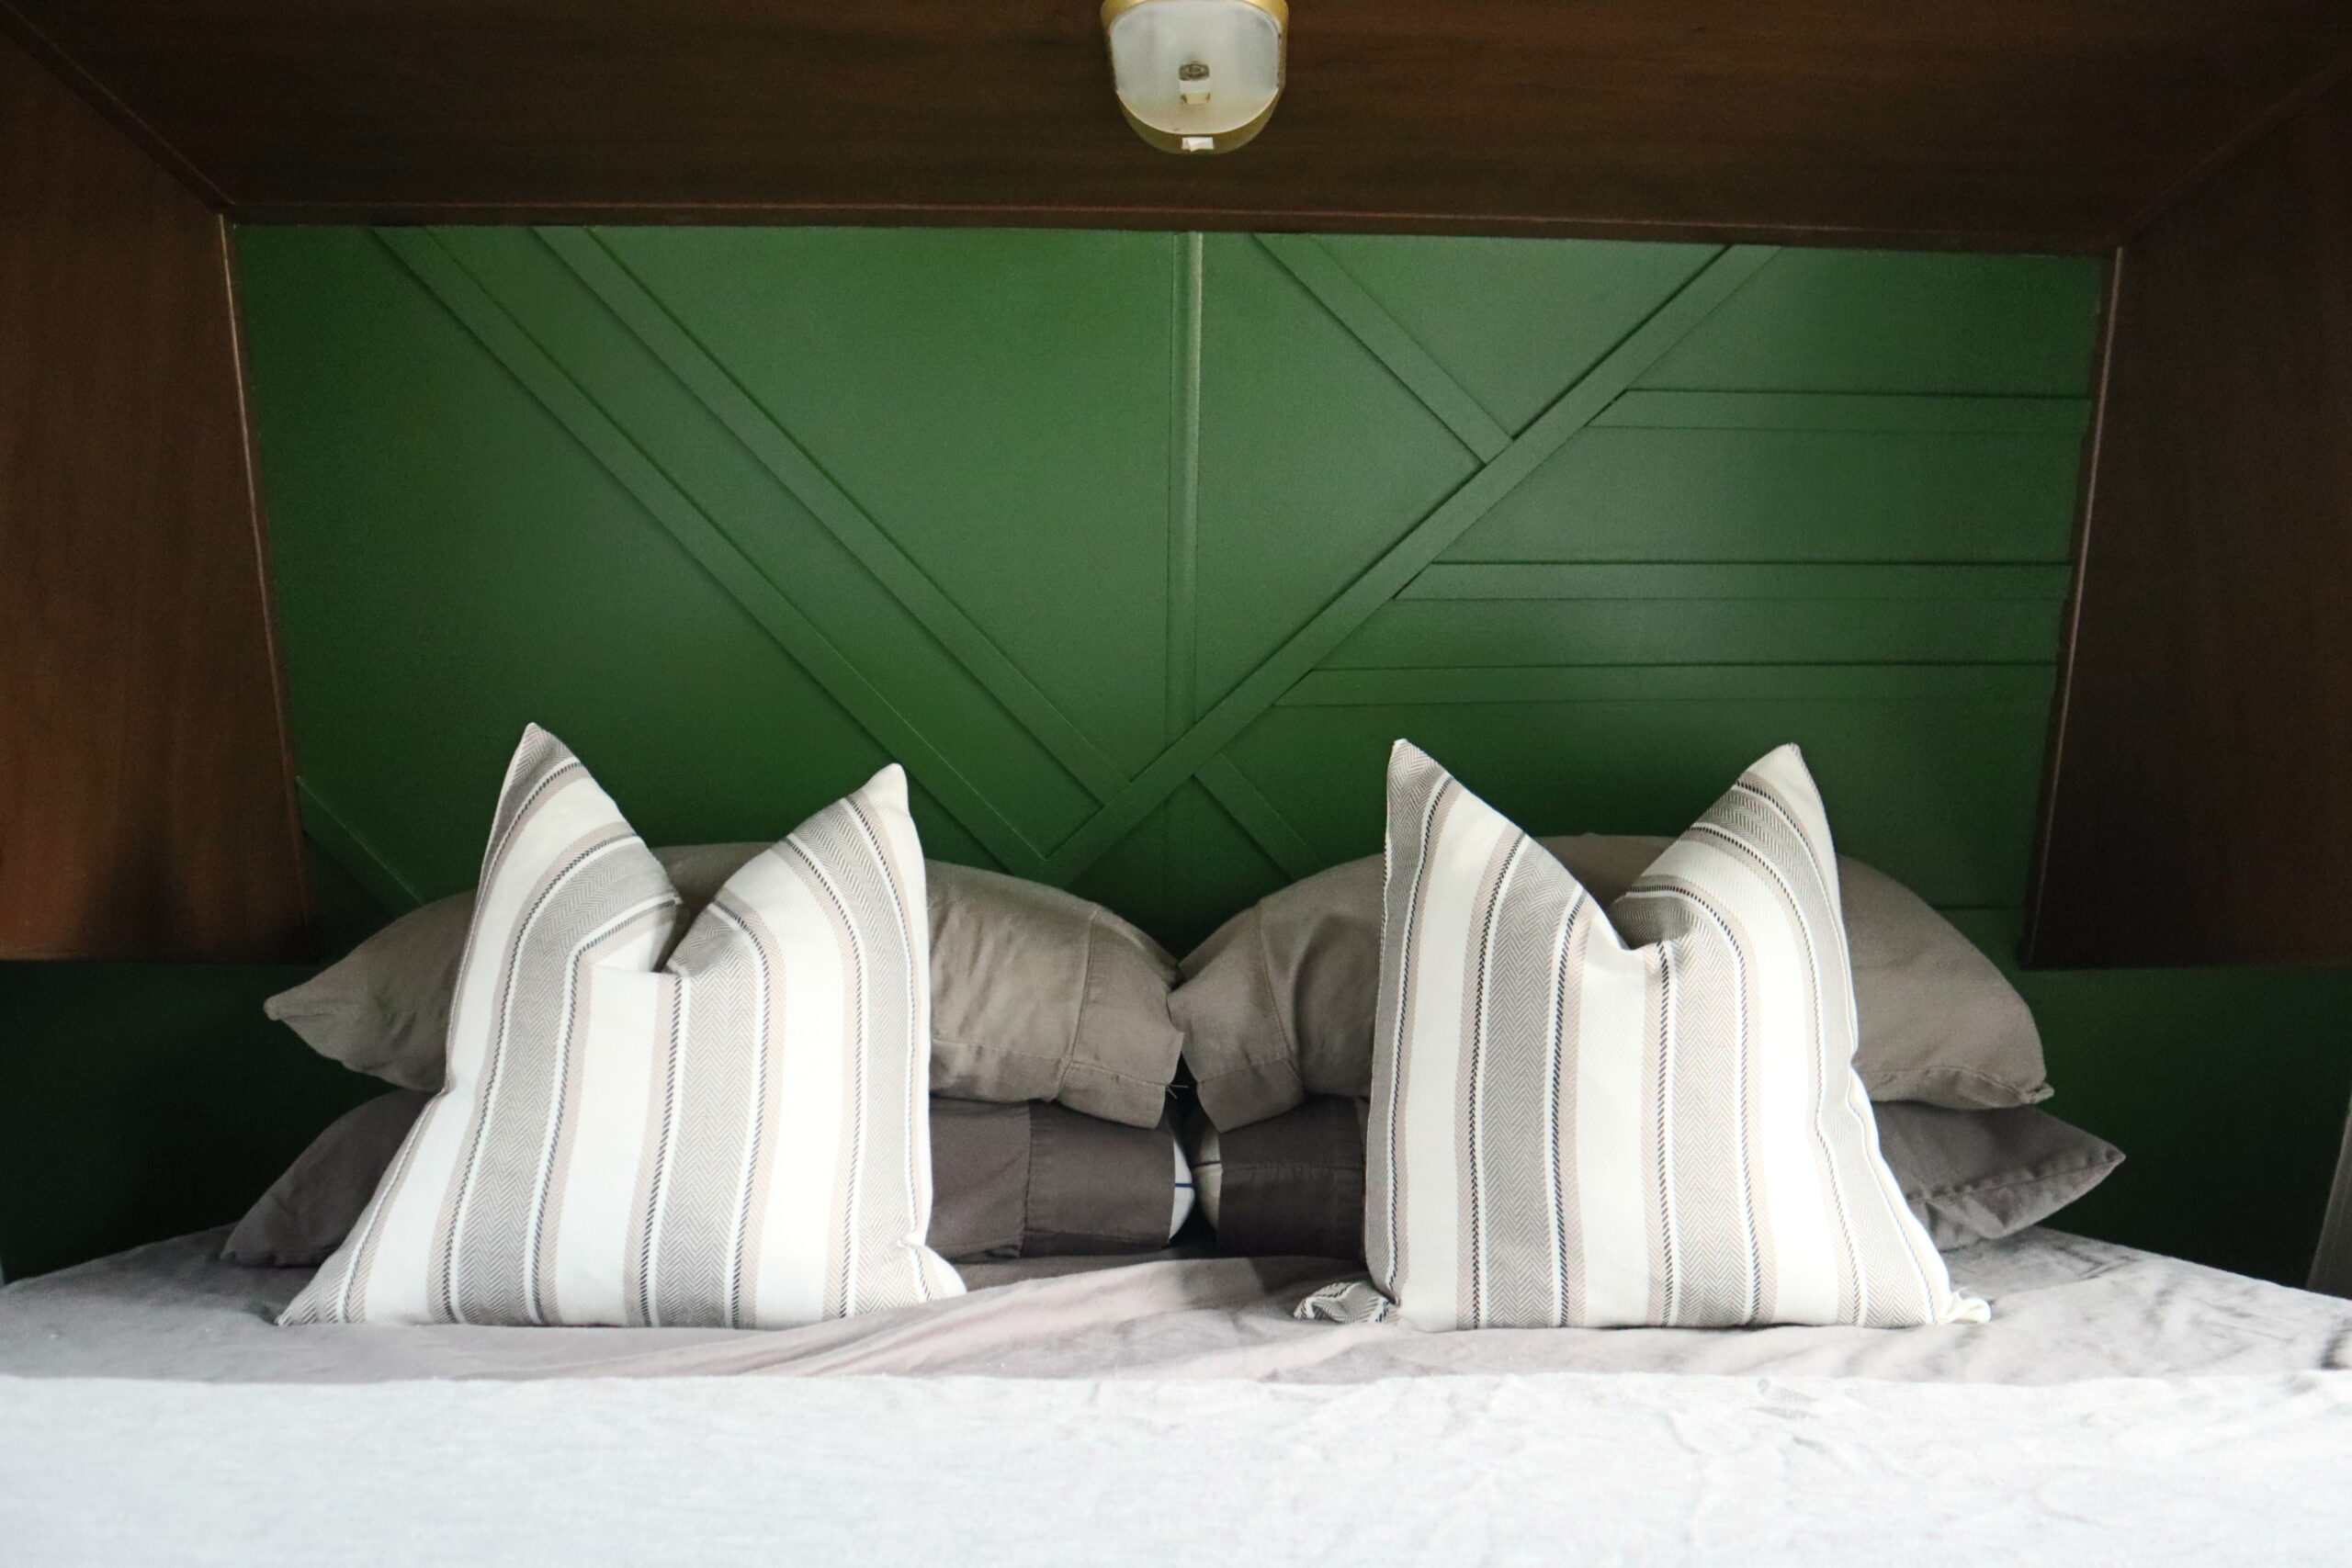 Emerald green feature wall in RV bedroom